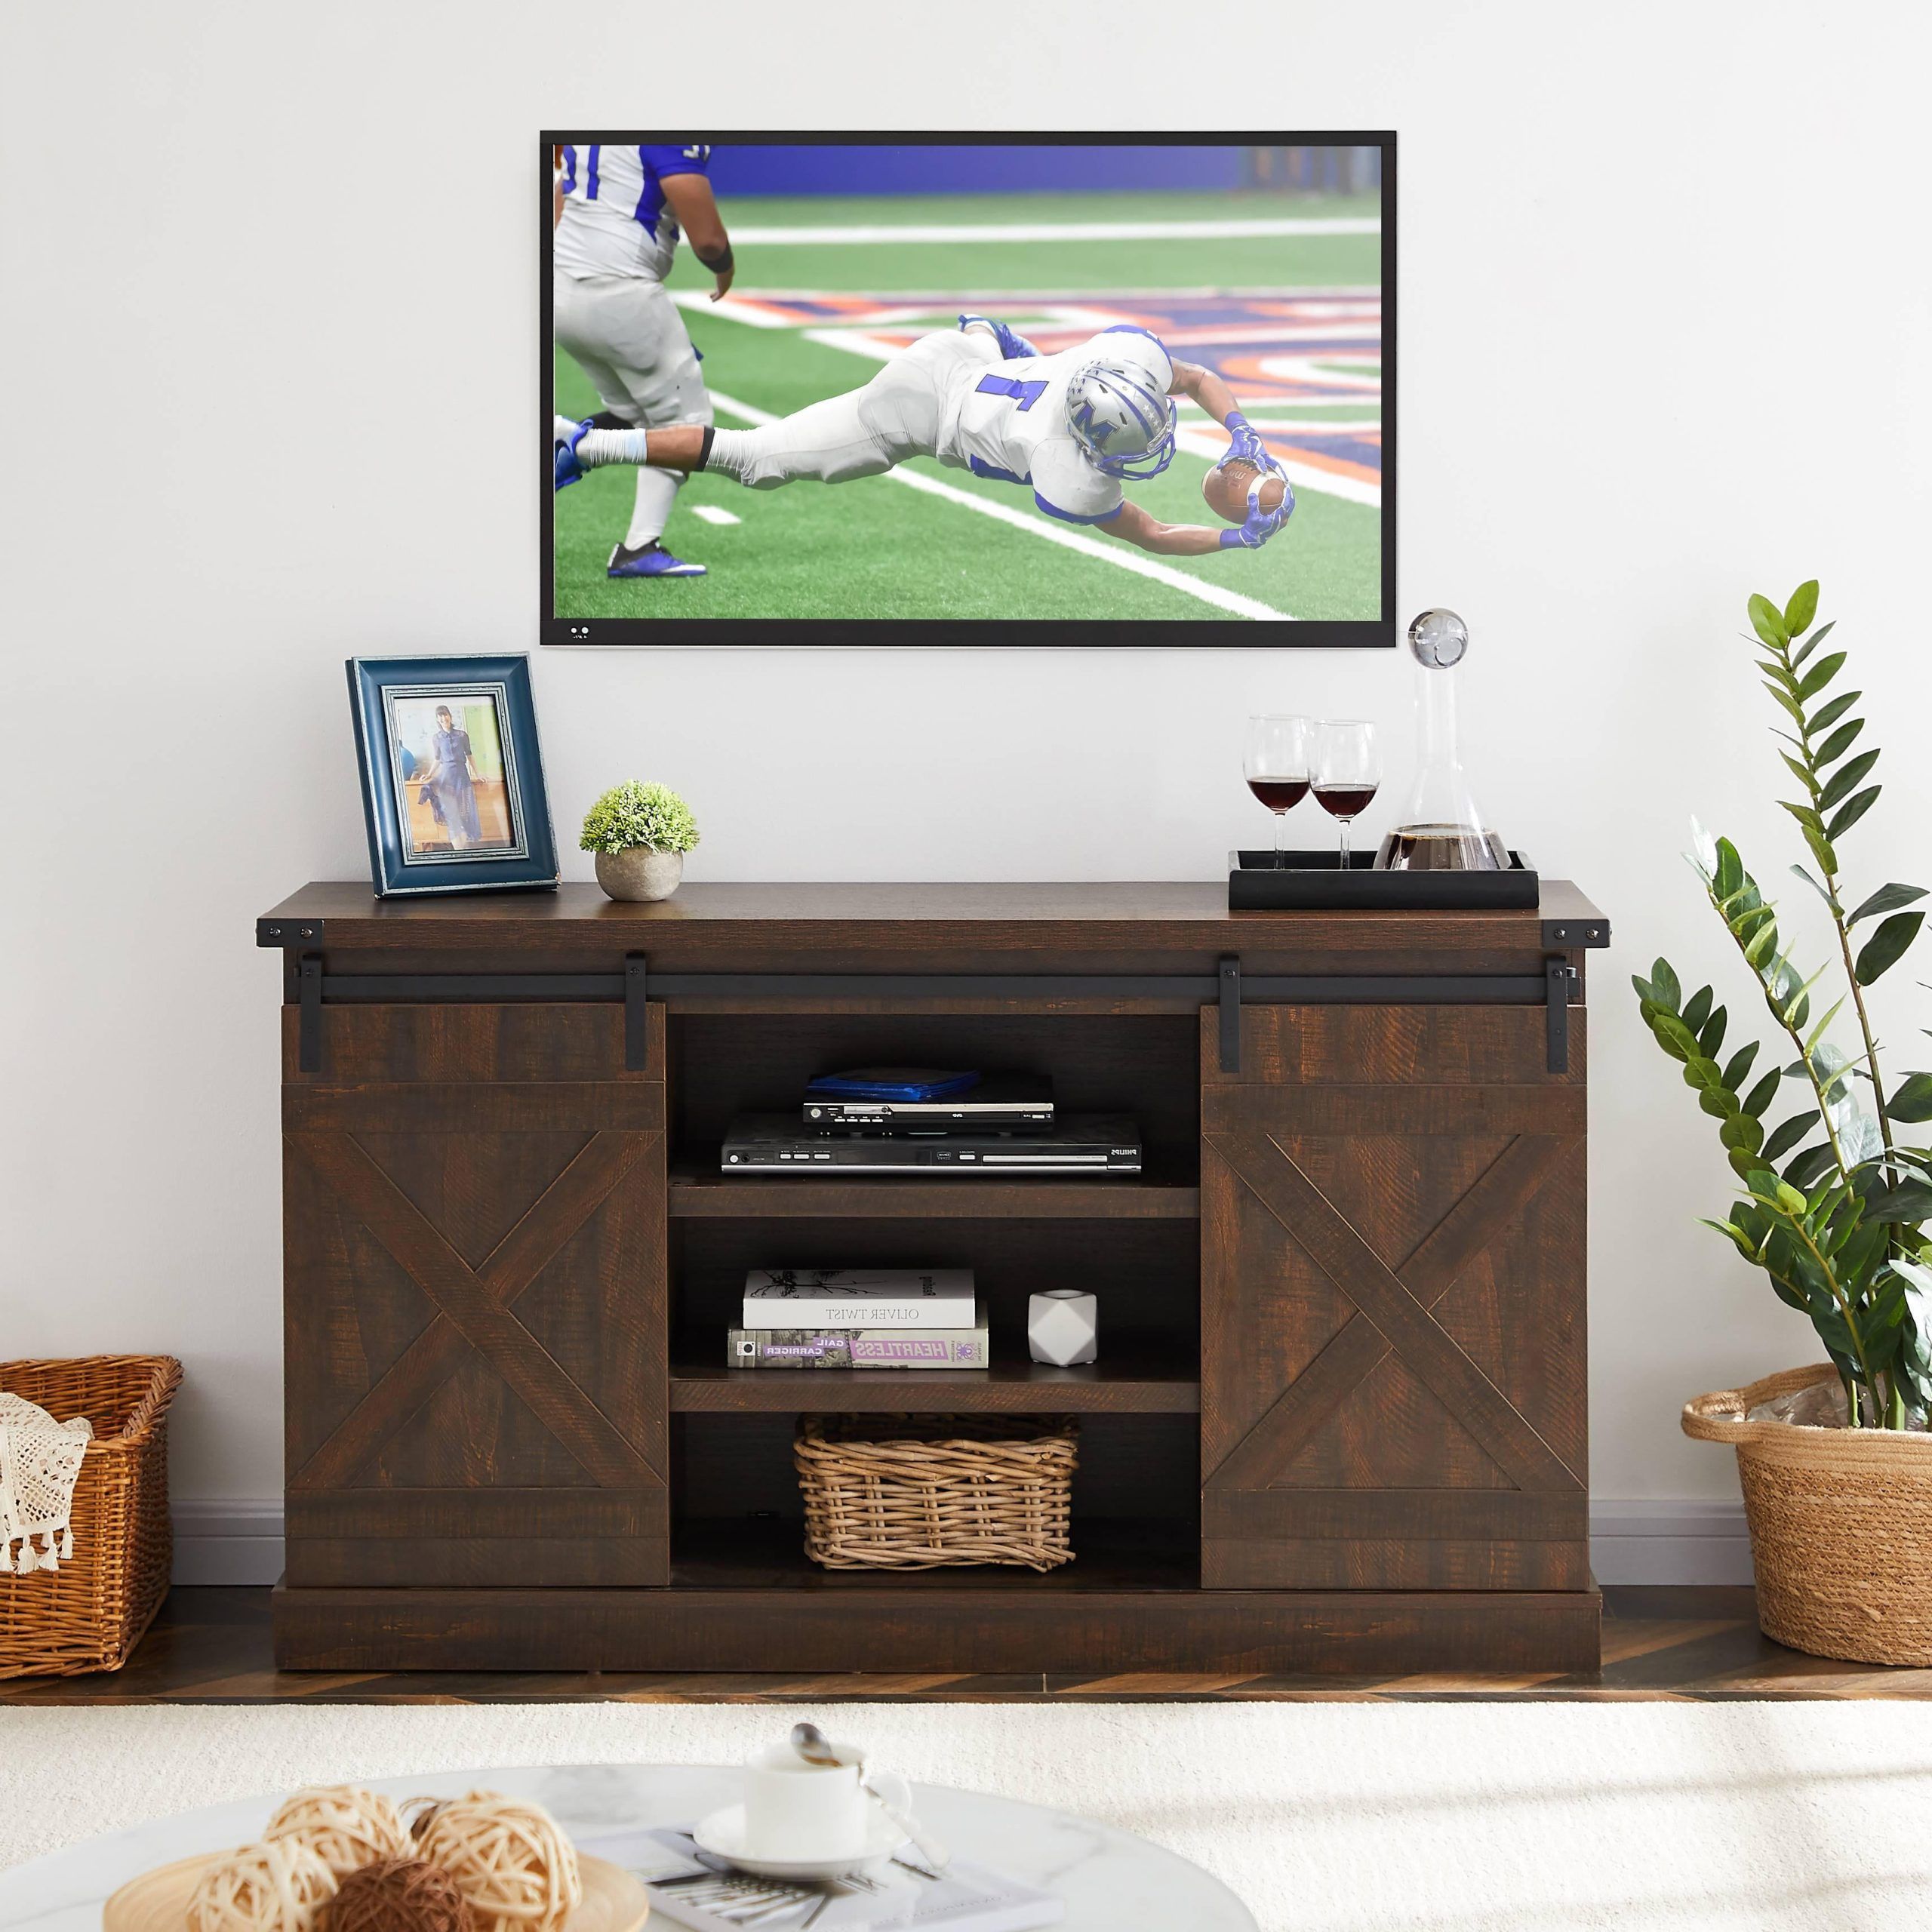 Cafe Tv Stands With Storage In Well Known Sliding Barn Door Tv Cabinet With Storage Space And Shelf, Modern (Photo 13 of 15)